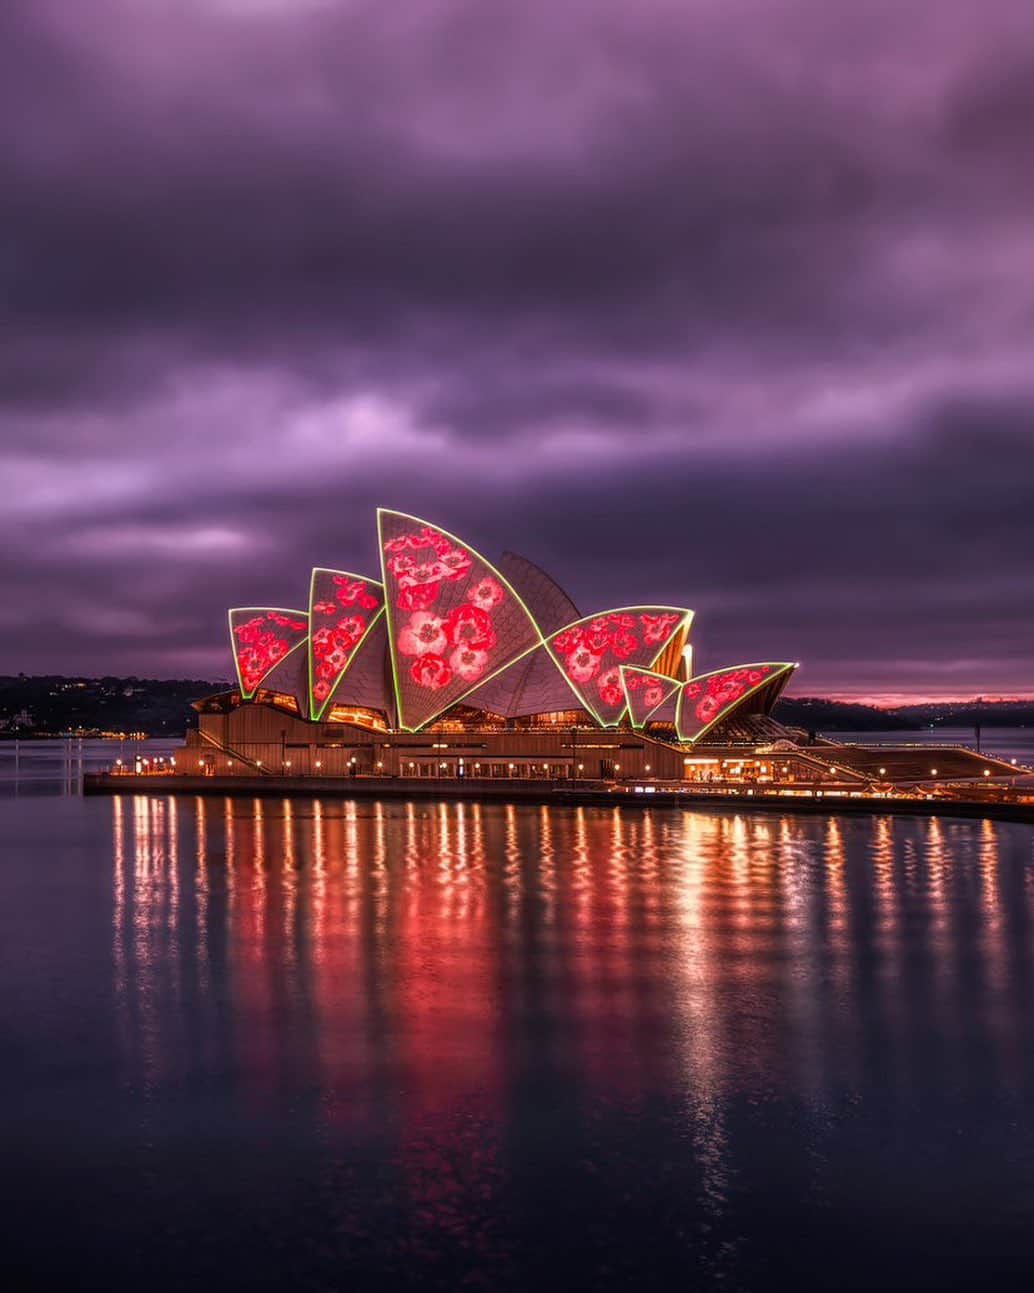 Australiaのインスタグラム：「Lest we forget ❤️ Today, the sails of the @sydneyoperahouse are illuminated with red poppies at both dawn and dusk to commemorate #RemembranceDay. On this day, we pay respect and pause for one minute to remember the service and sacrifice of our veterans and current serving personnel. (📸: @philipps.world.of.photography) #SeeAustralia #ComeAndSayGday #LestWeForget」